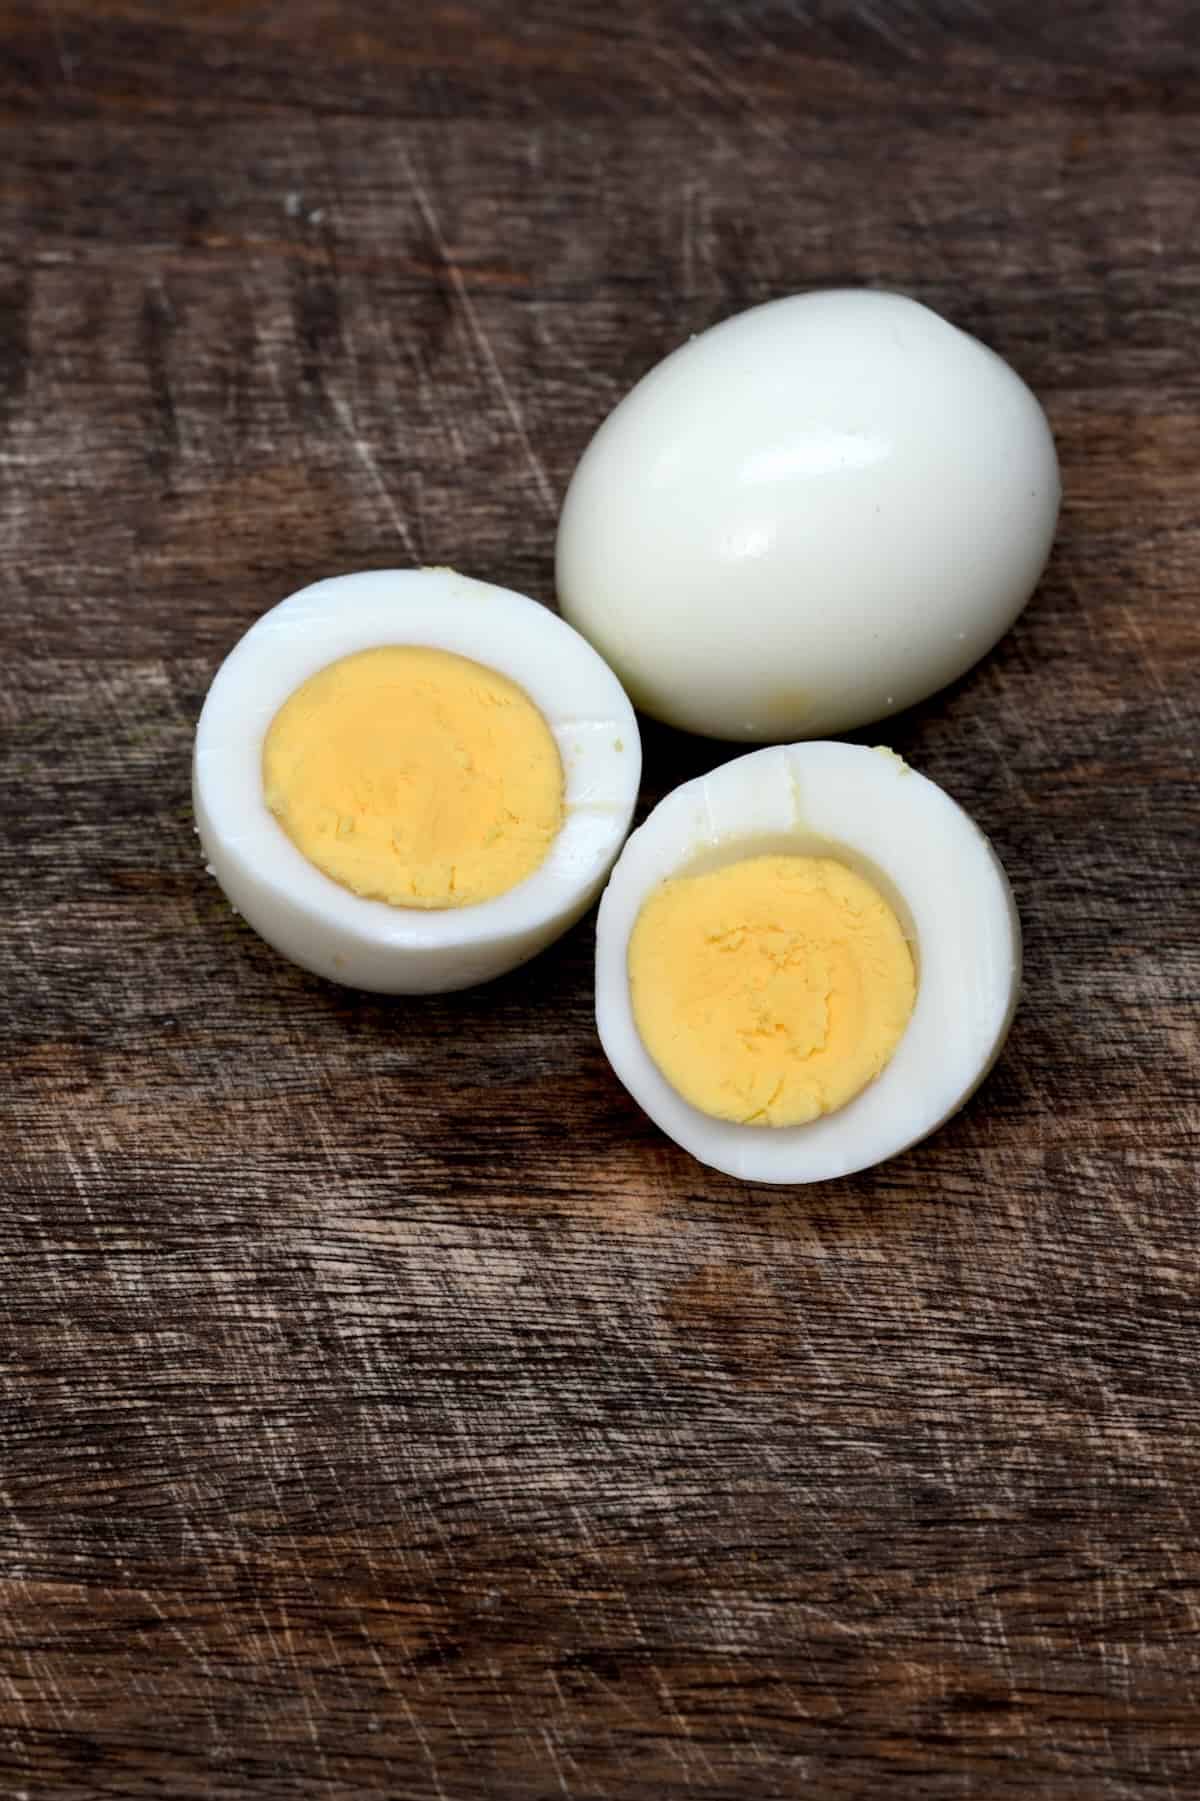 Twp hard boiled eggs, one of which is cut in half